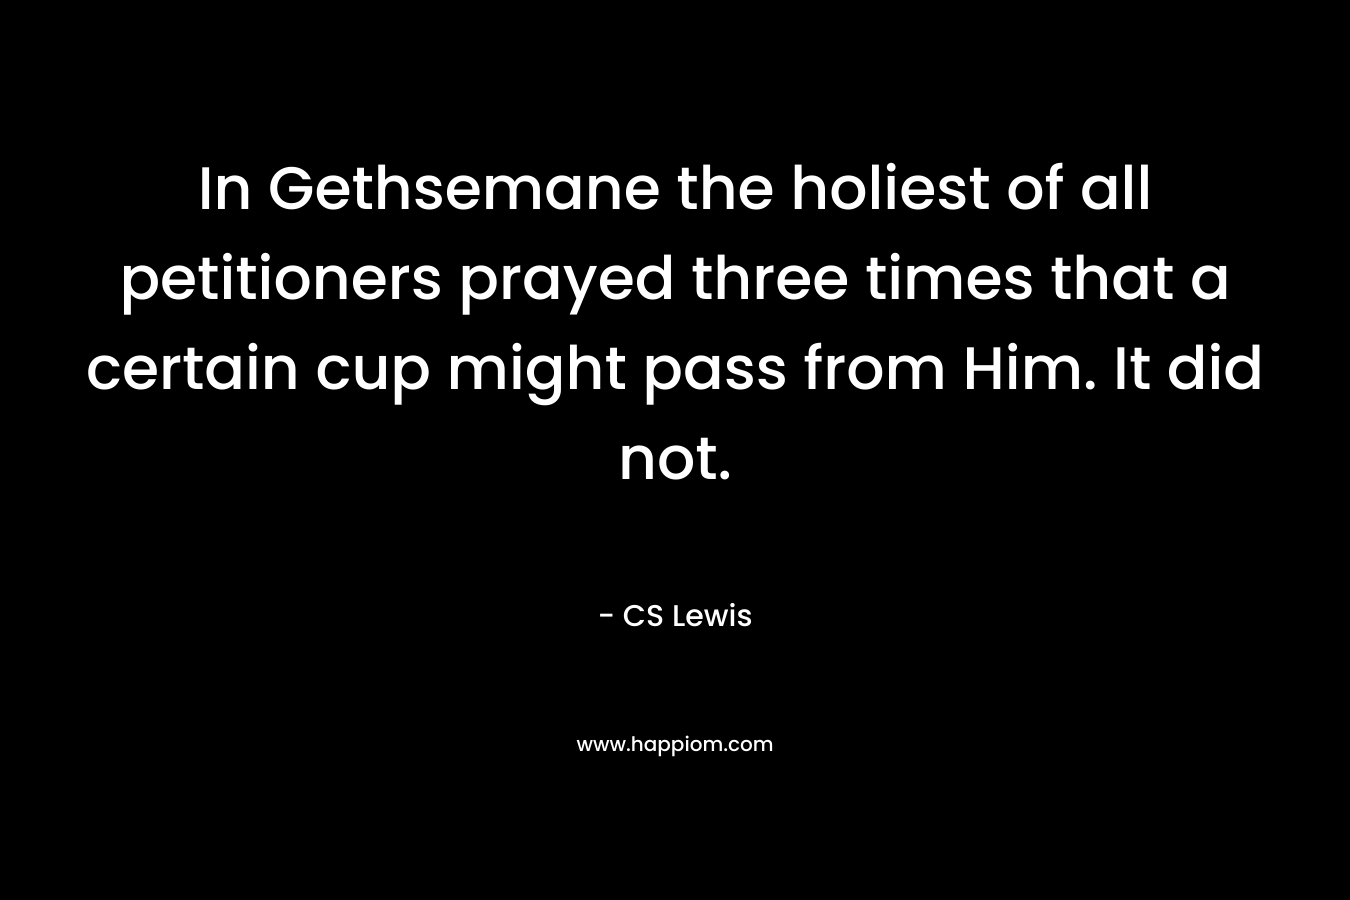 In Gethsemane the holiest of all petitioners prayed three times that a certain cup might pass from Him. It did not.